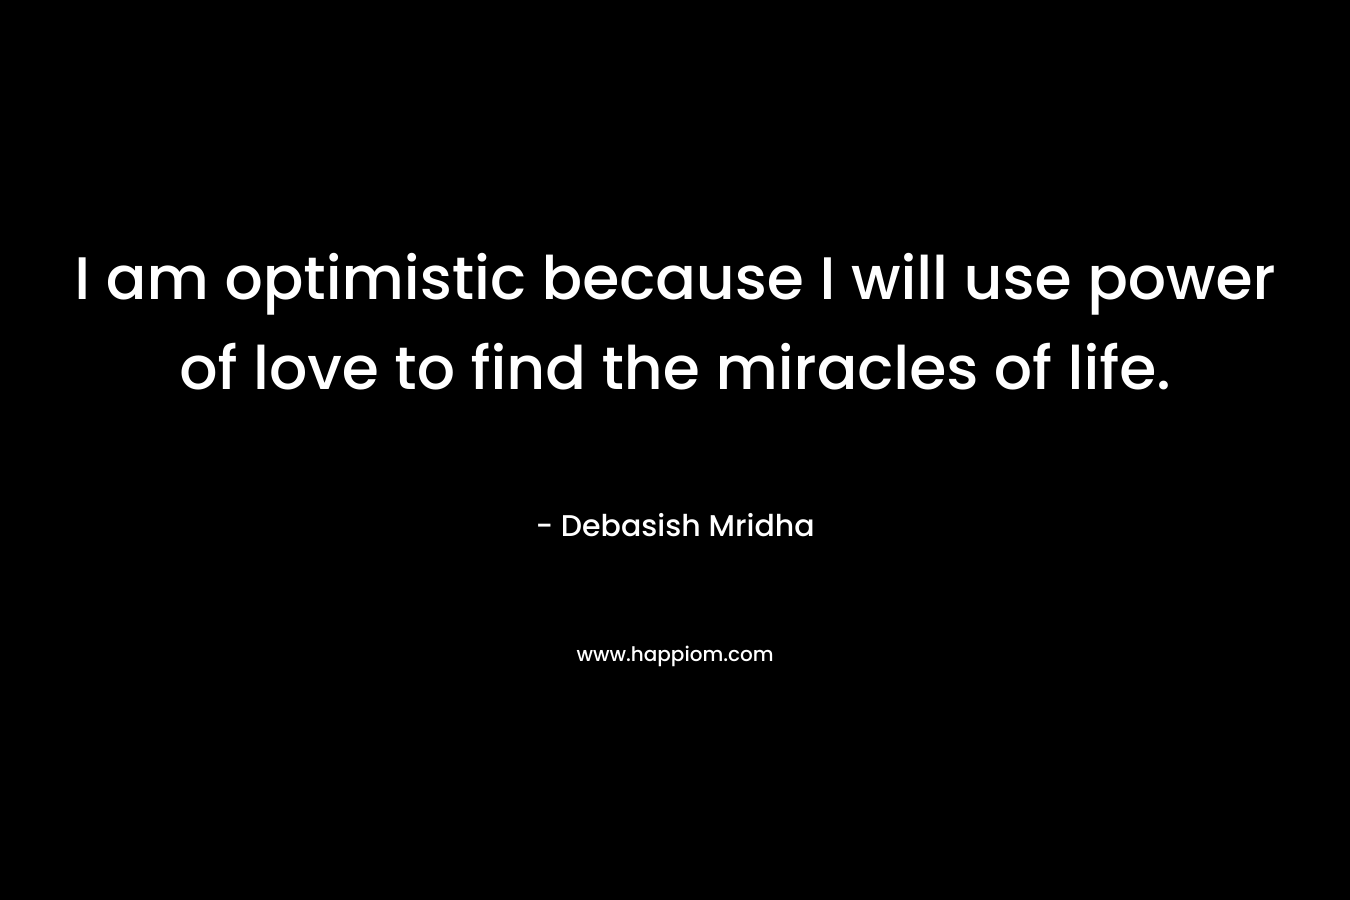 I am optimistic because I will use power of love to find the miracles of life.